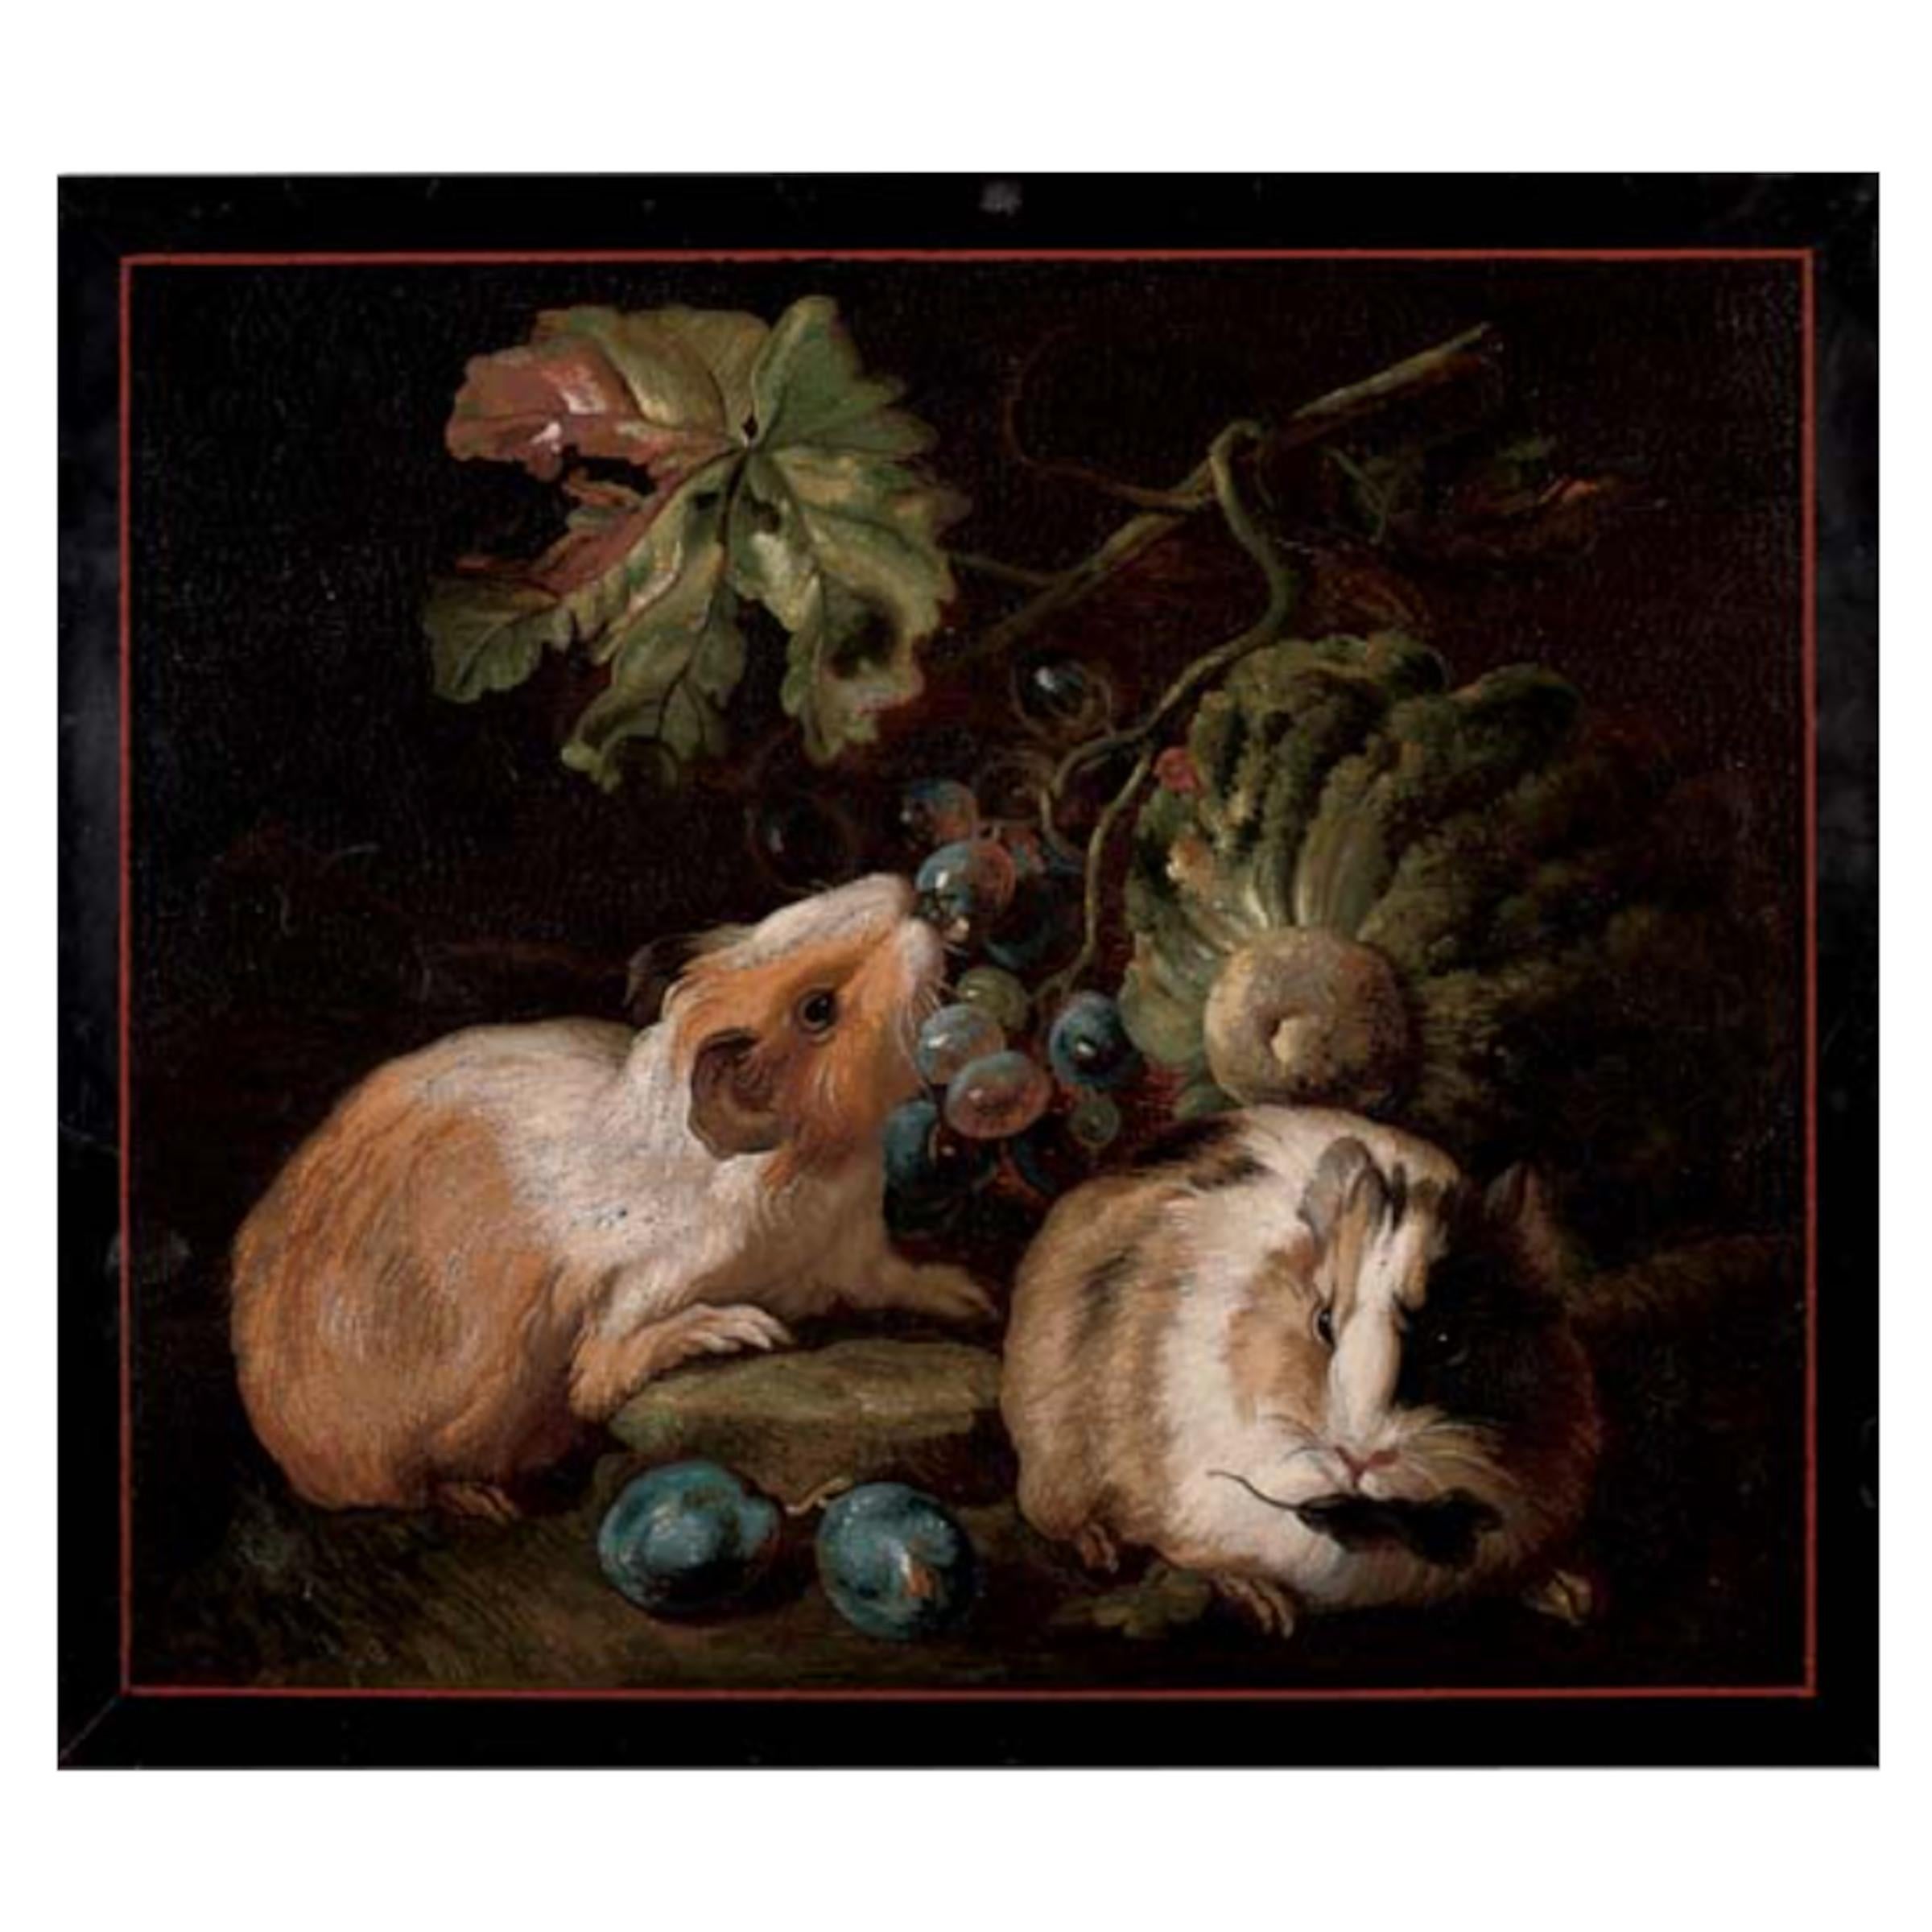 European Important Micromosaic of Two Guinea Pigs Eating Cabbage and Grapes